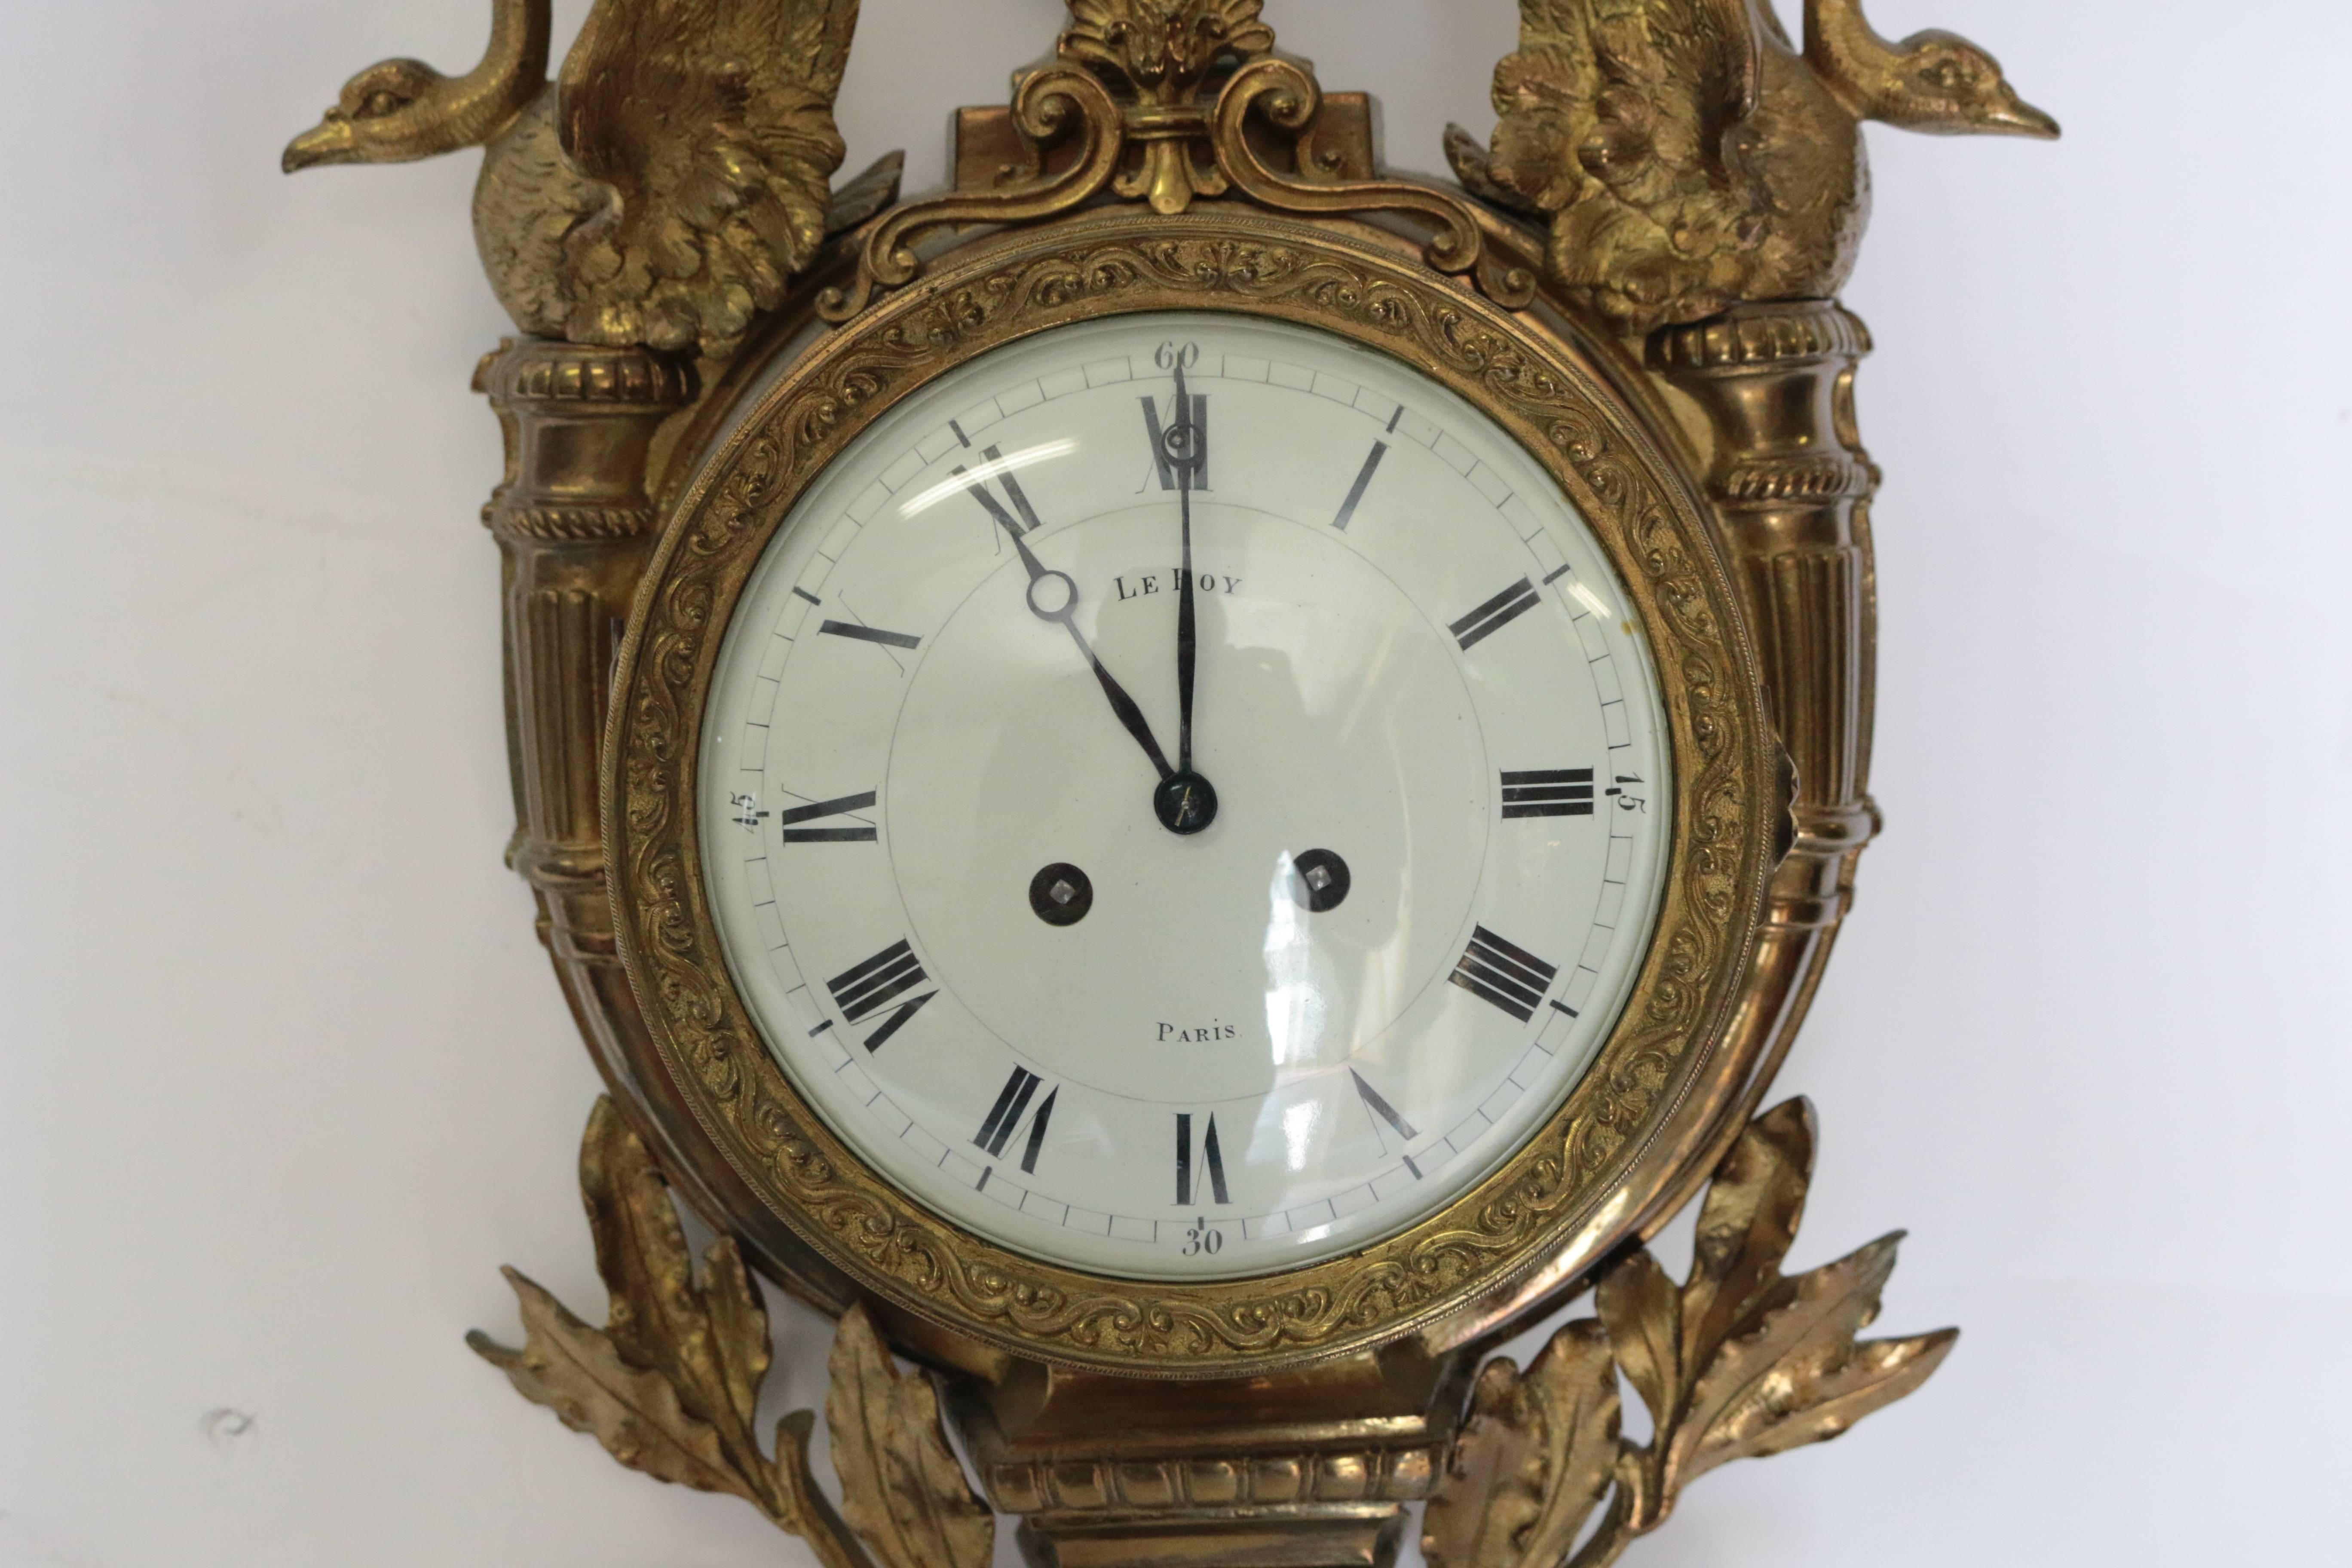 Made by one of the most word's finest makers of antique clocks LeRoy.
This elegant Empire wall clock is made of bronze with swans on each side.
Original porcelain face.
Original gilding.
In excellent used condition.